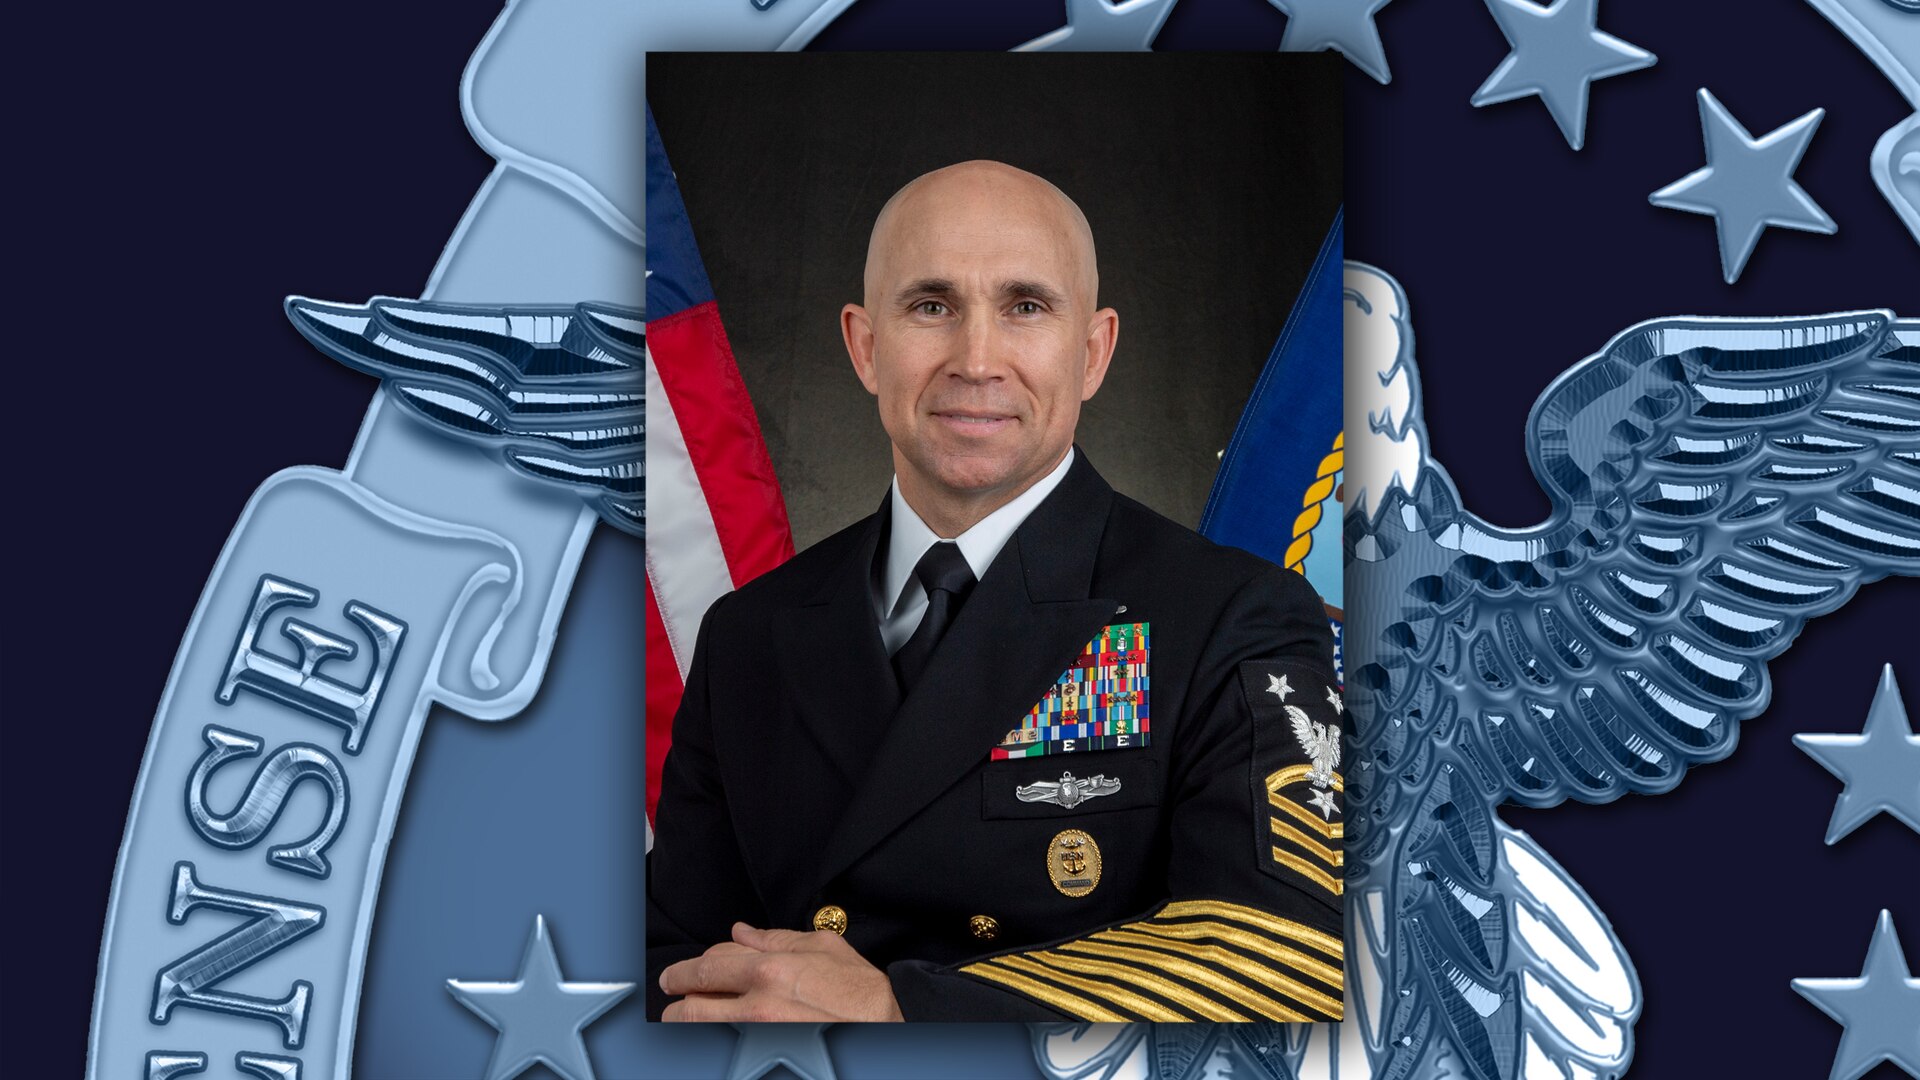 Official photo of Navy Master Chief Petty Officer James Butler against DLA rotator background.